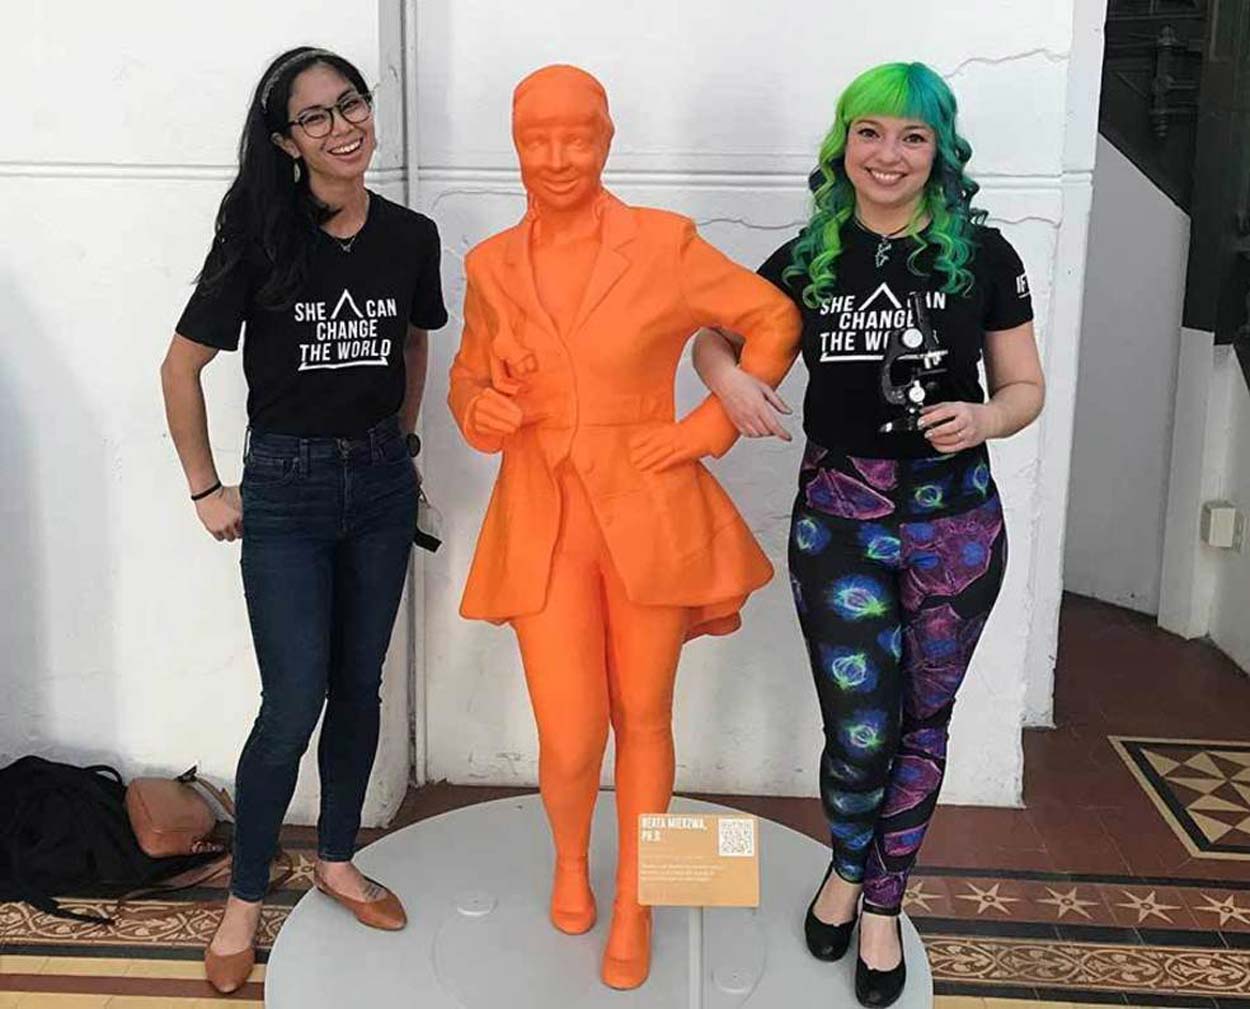 Beata Mierzwa wearing her science fashion with Claire Meaders next to Mierzwa’s statue at #IfThenSheCan - The Exhibit at the Smithsonian